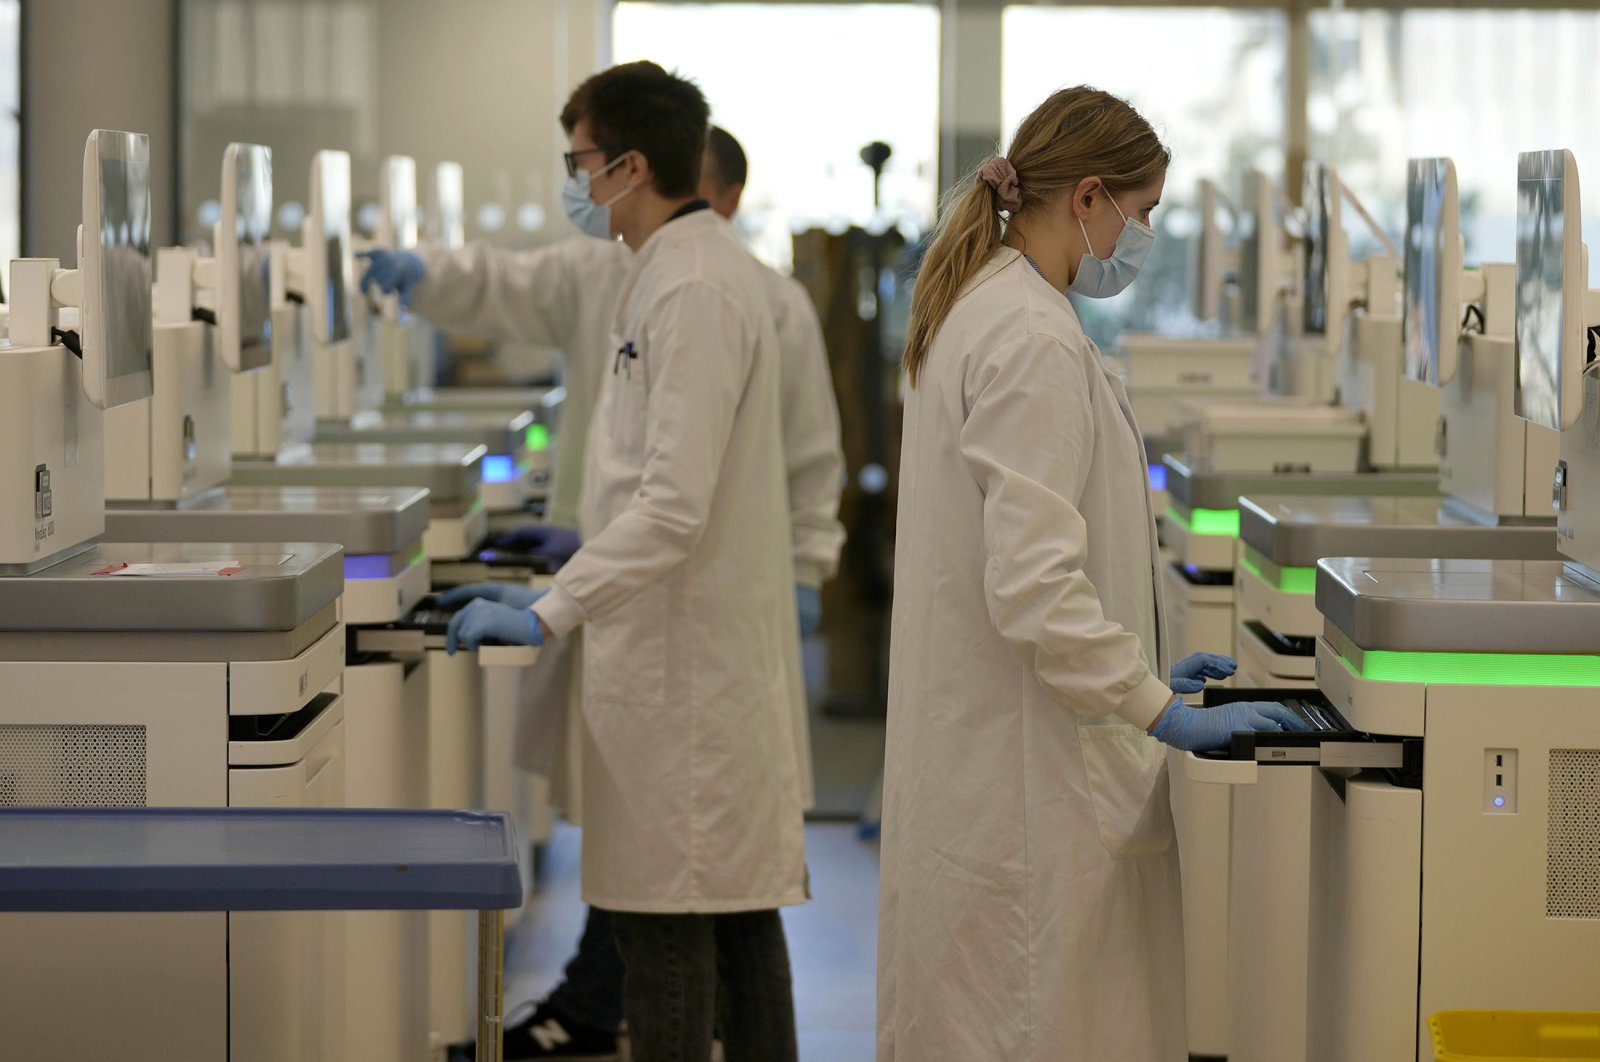 Research assistants watch the sequencing machines analyzing the genetic material of COVID-19 cases at the Wellcome Sanger Institute, Genome Campus, Hinxton, Cambridgeshire, U.K., Jan. 7, 2022. (AP Photo)